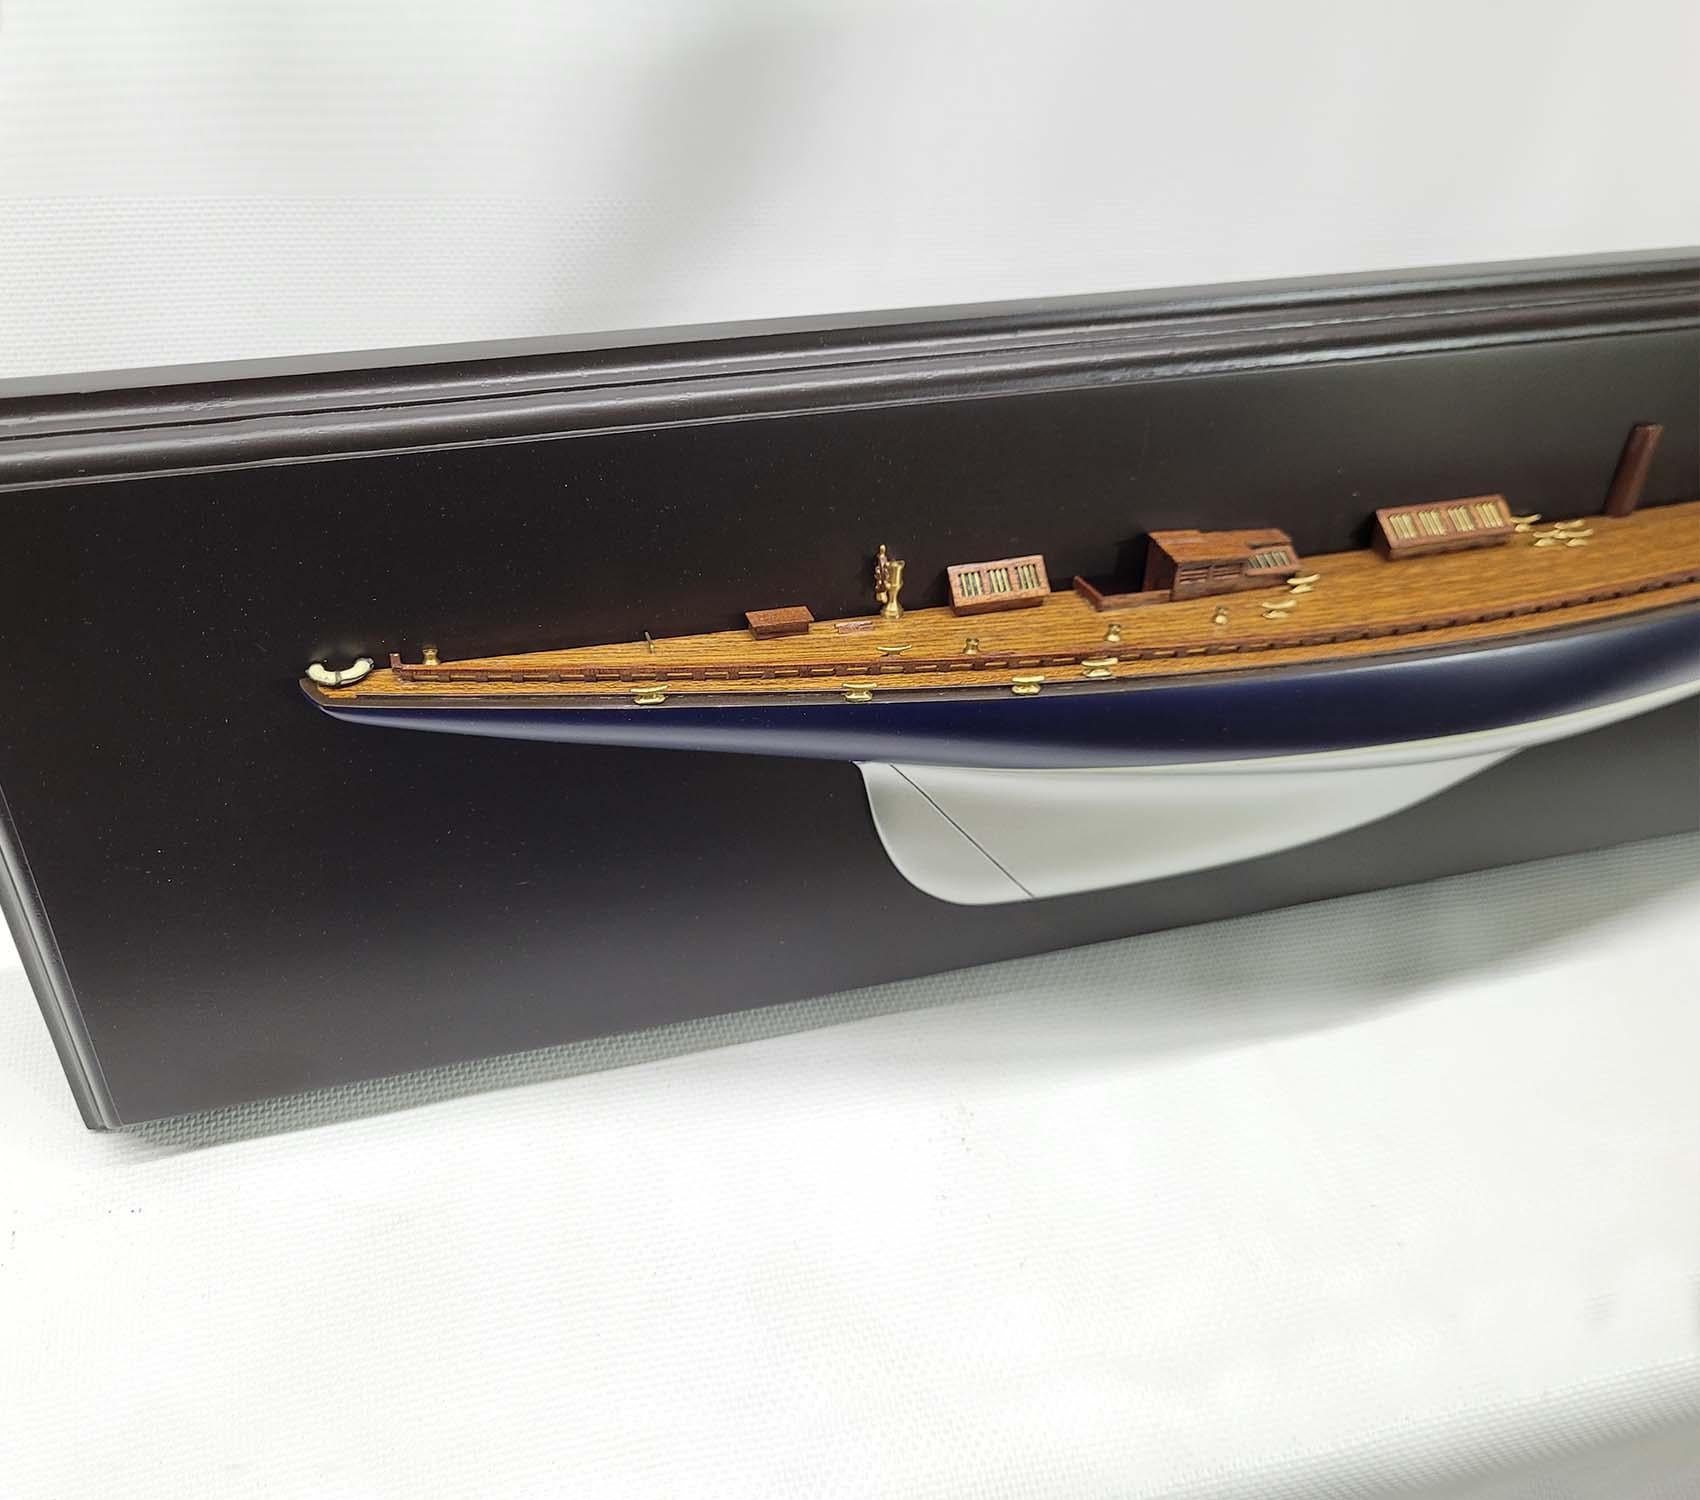 North American Half Model of the Yacht Endeavor - Silver